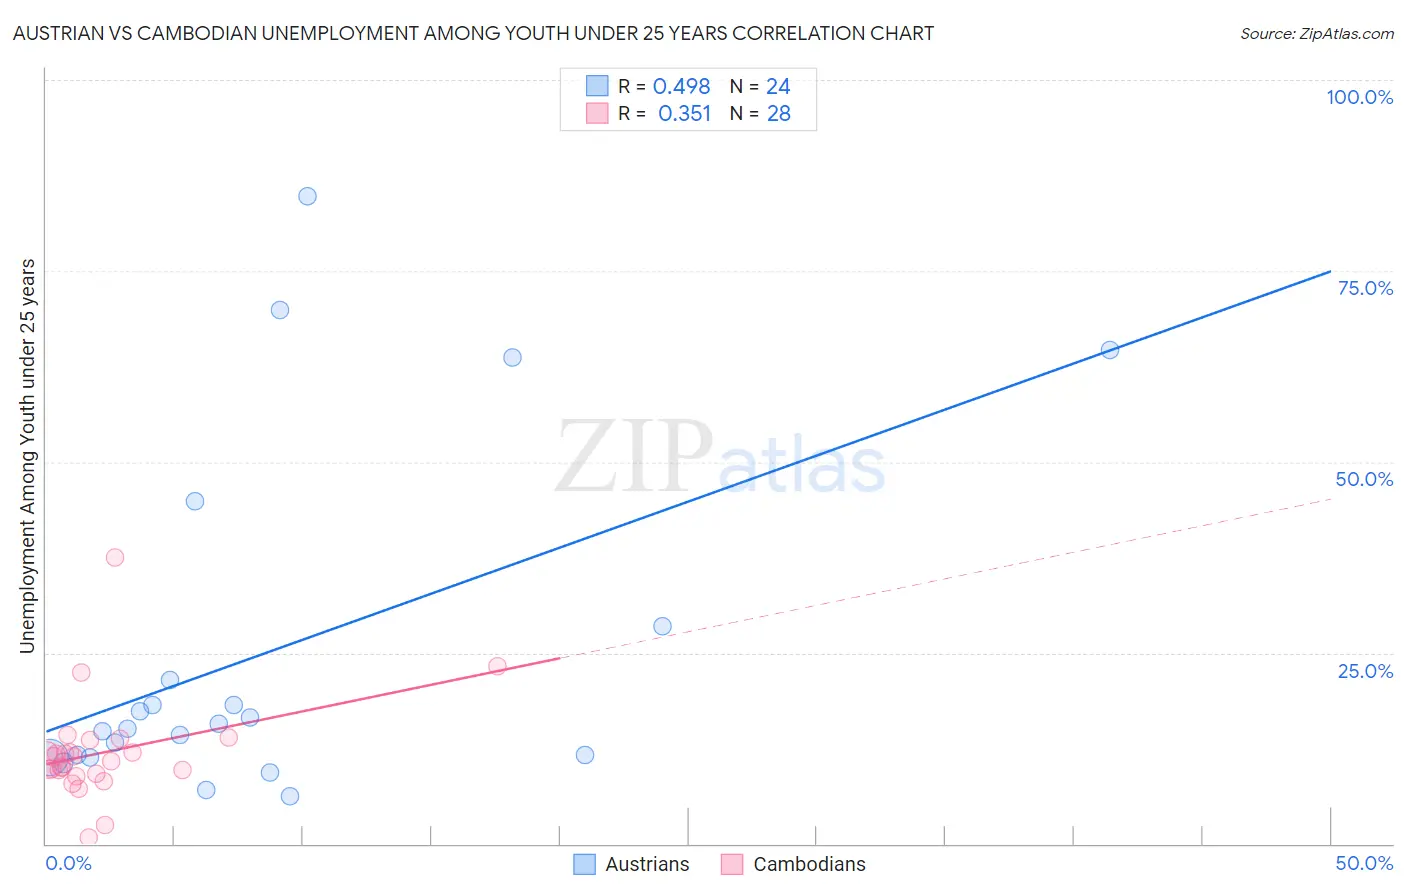 Austrian vs Cambodian Unemployment Among Youth under 25 years